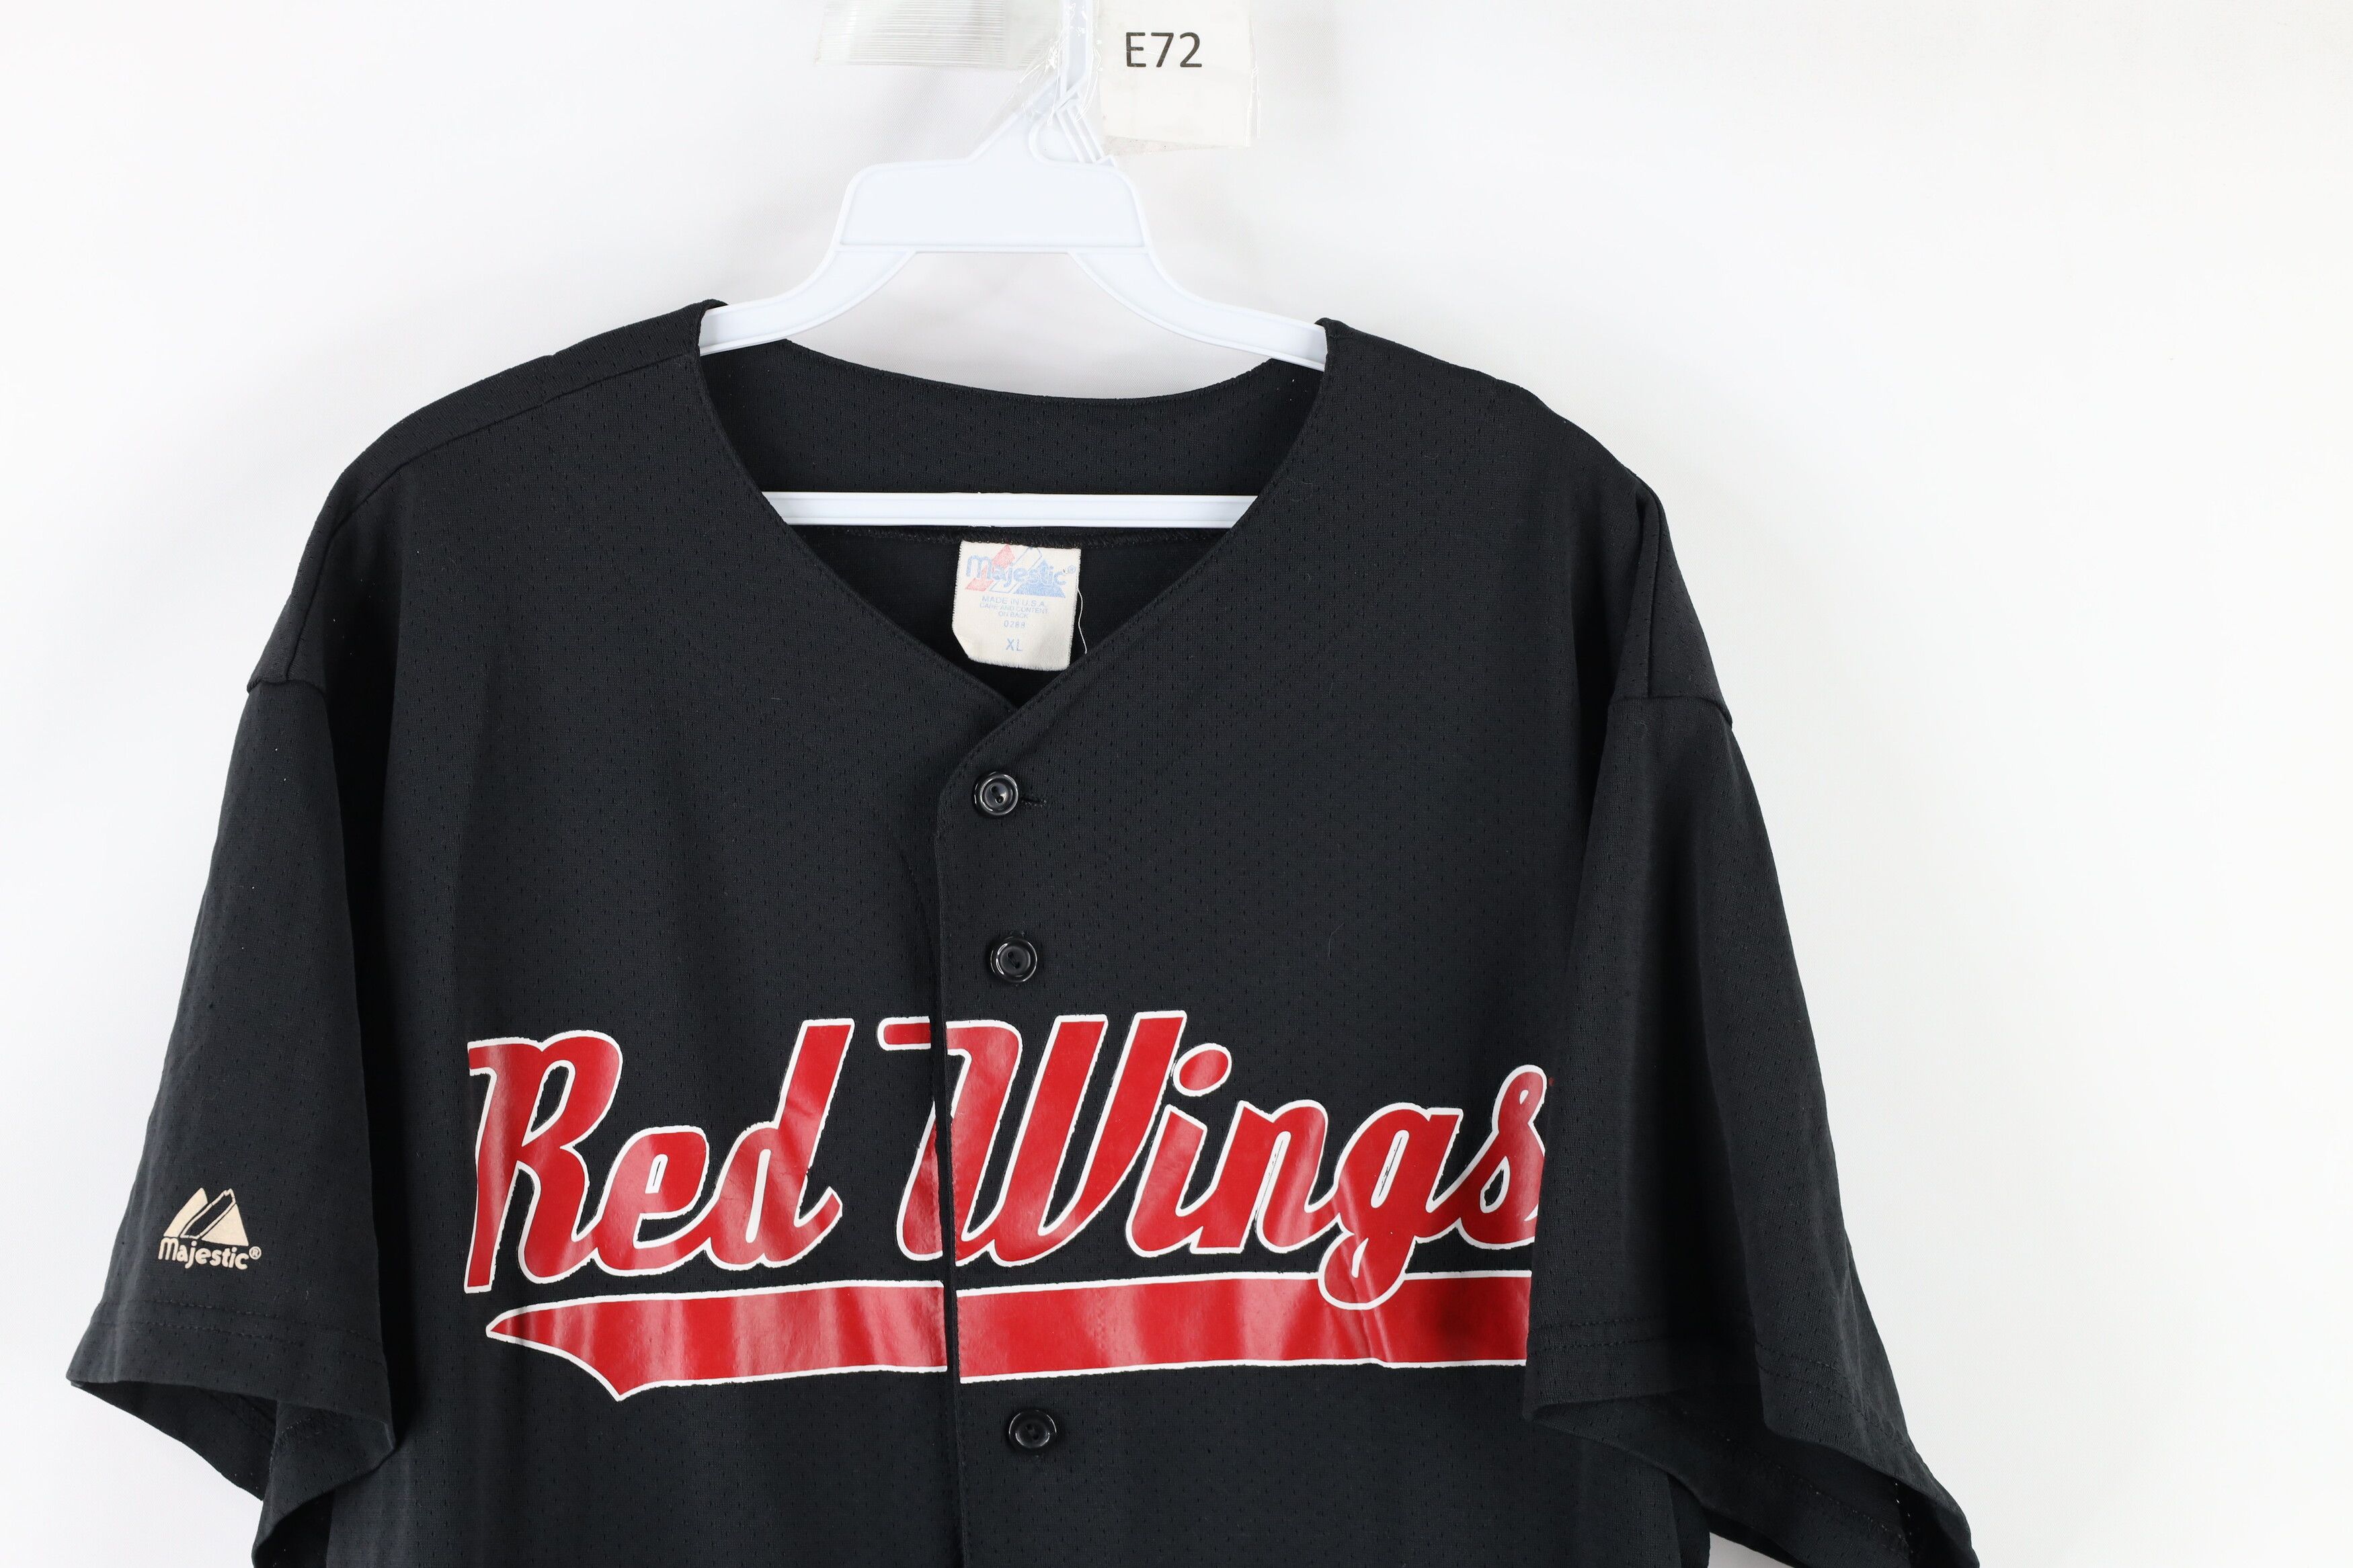 Vintage Vintage 90s Majestic Detroit Red Wings Baseball Jersey USA Size US XL / EU 56 / 4 - 2 Preview